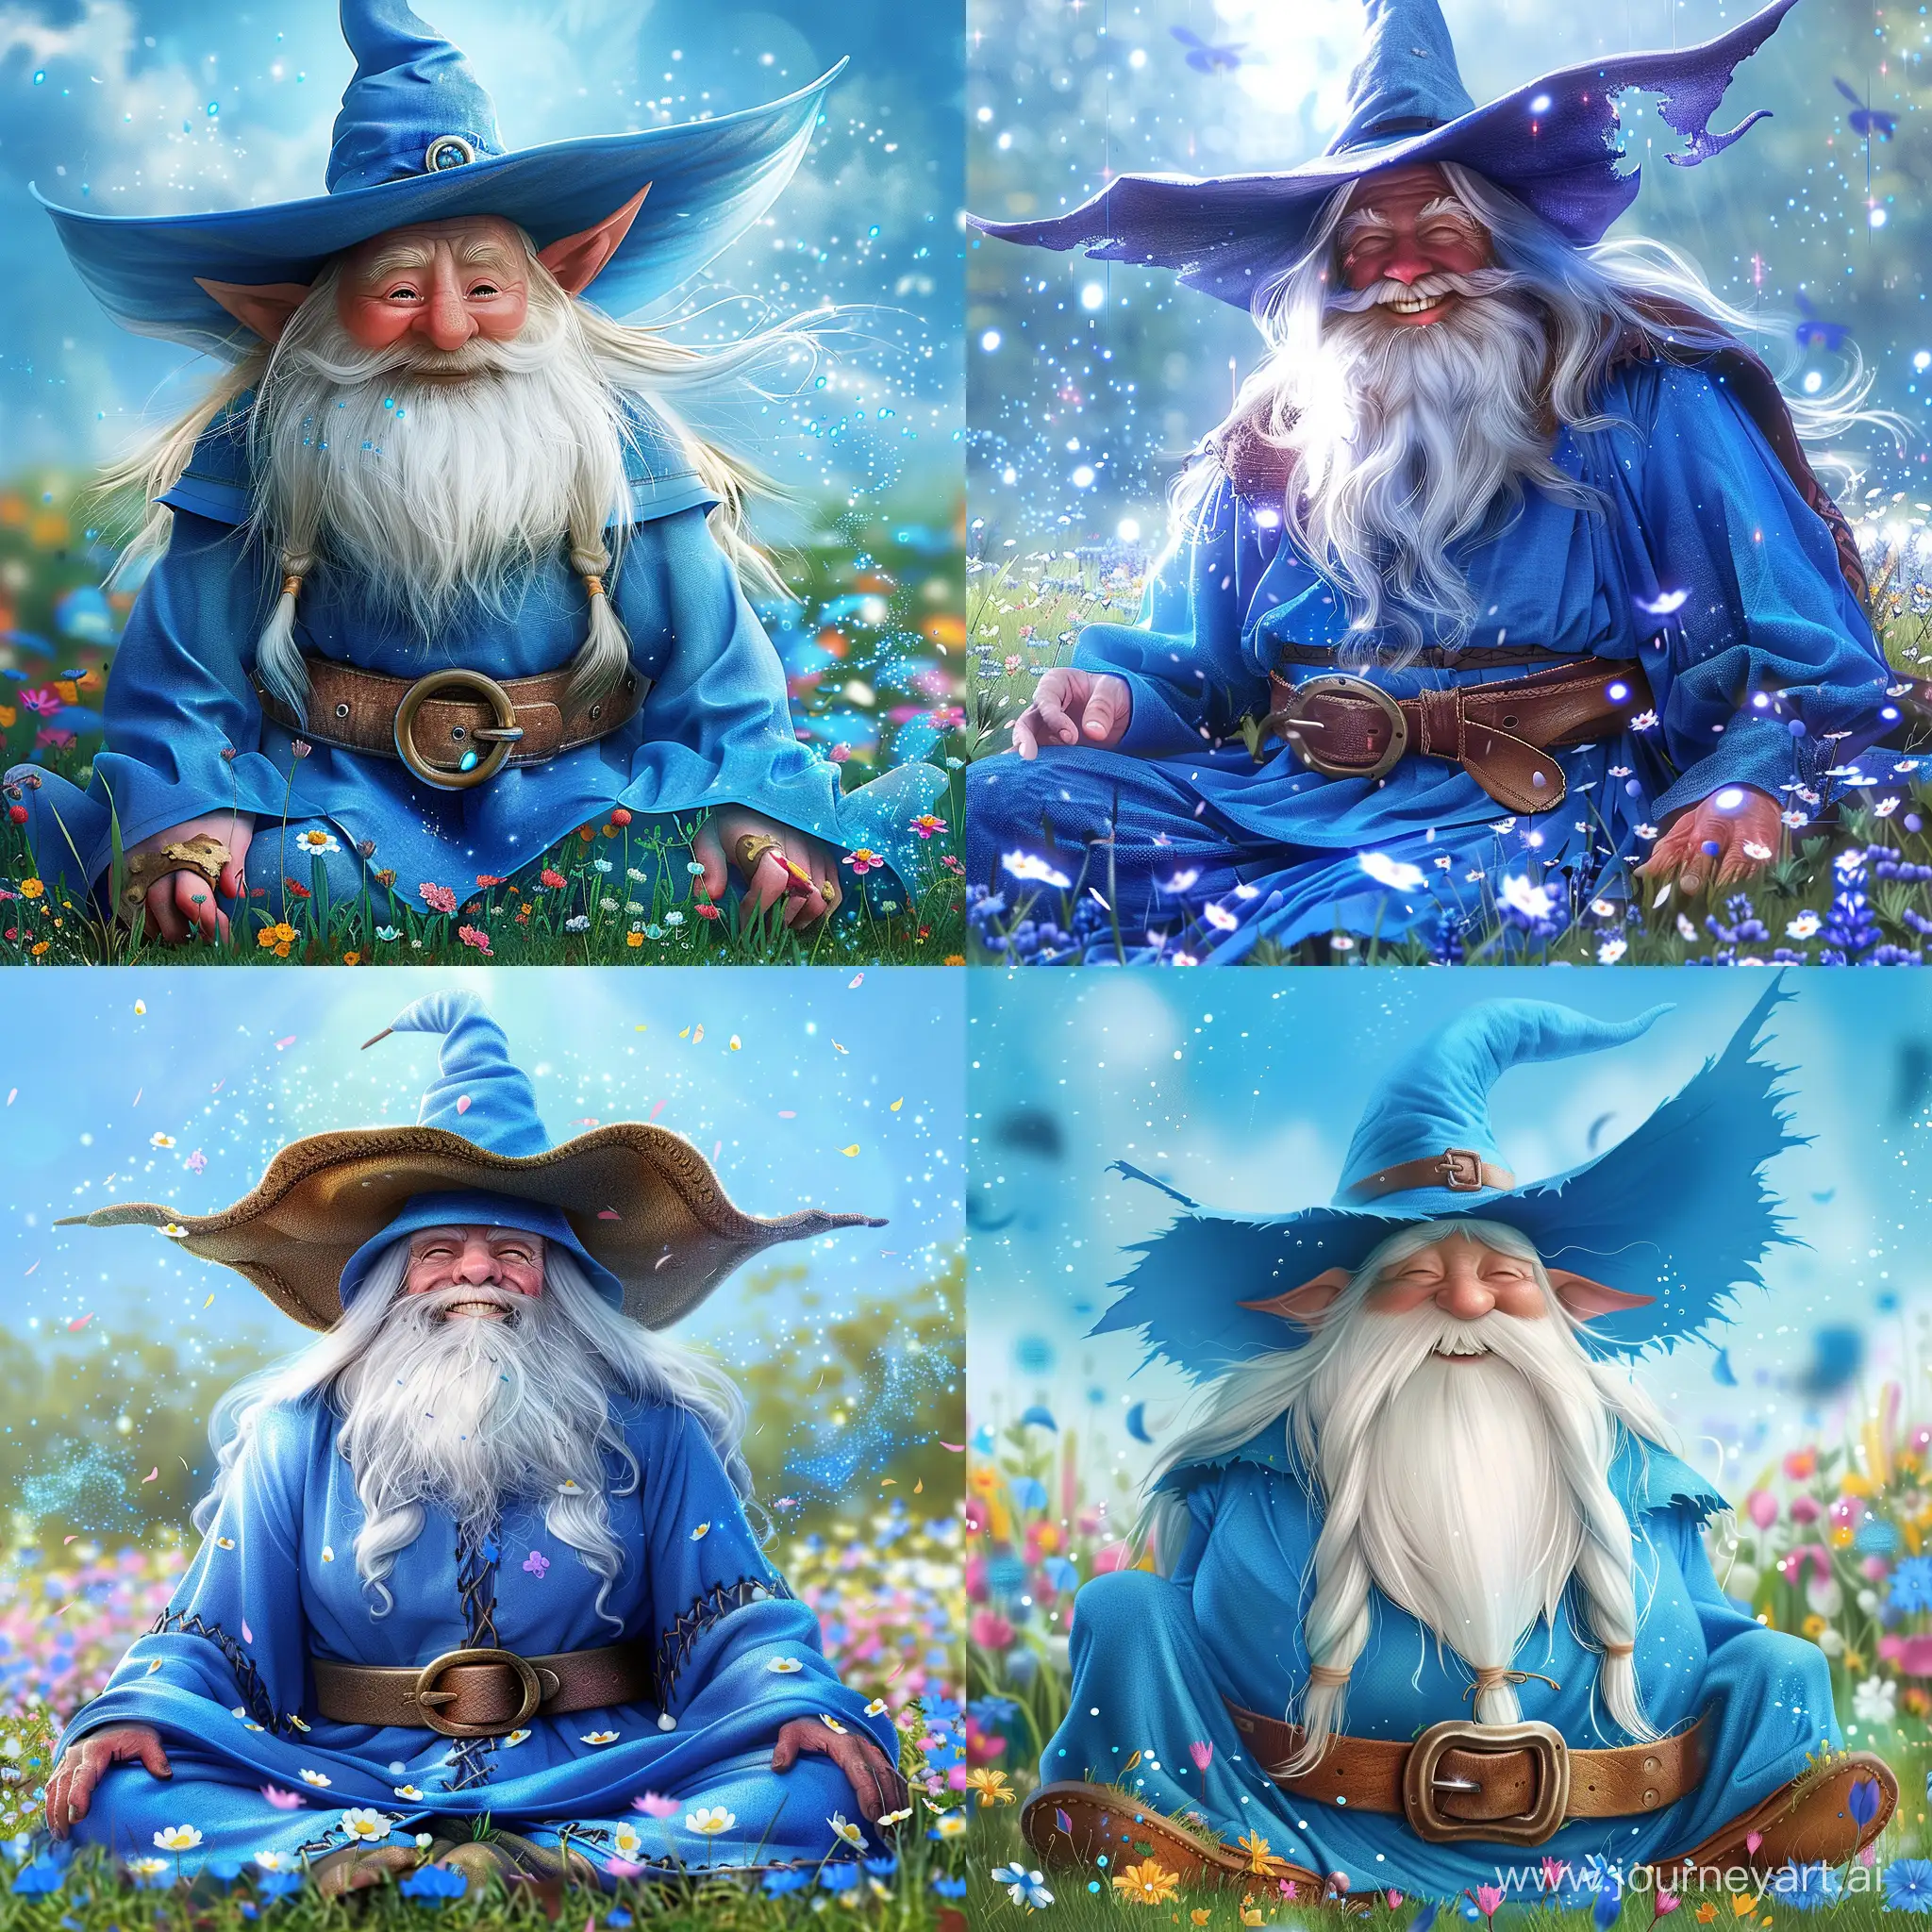 Cheerful-Wizard-in-Enchanted-Meadow-with-Blue-Sparkles